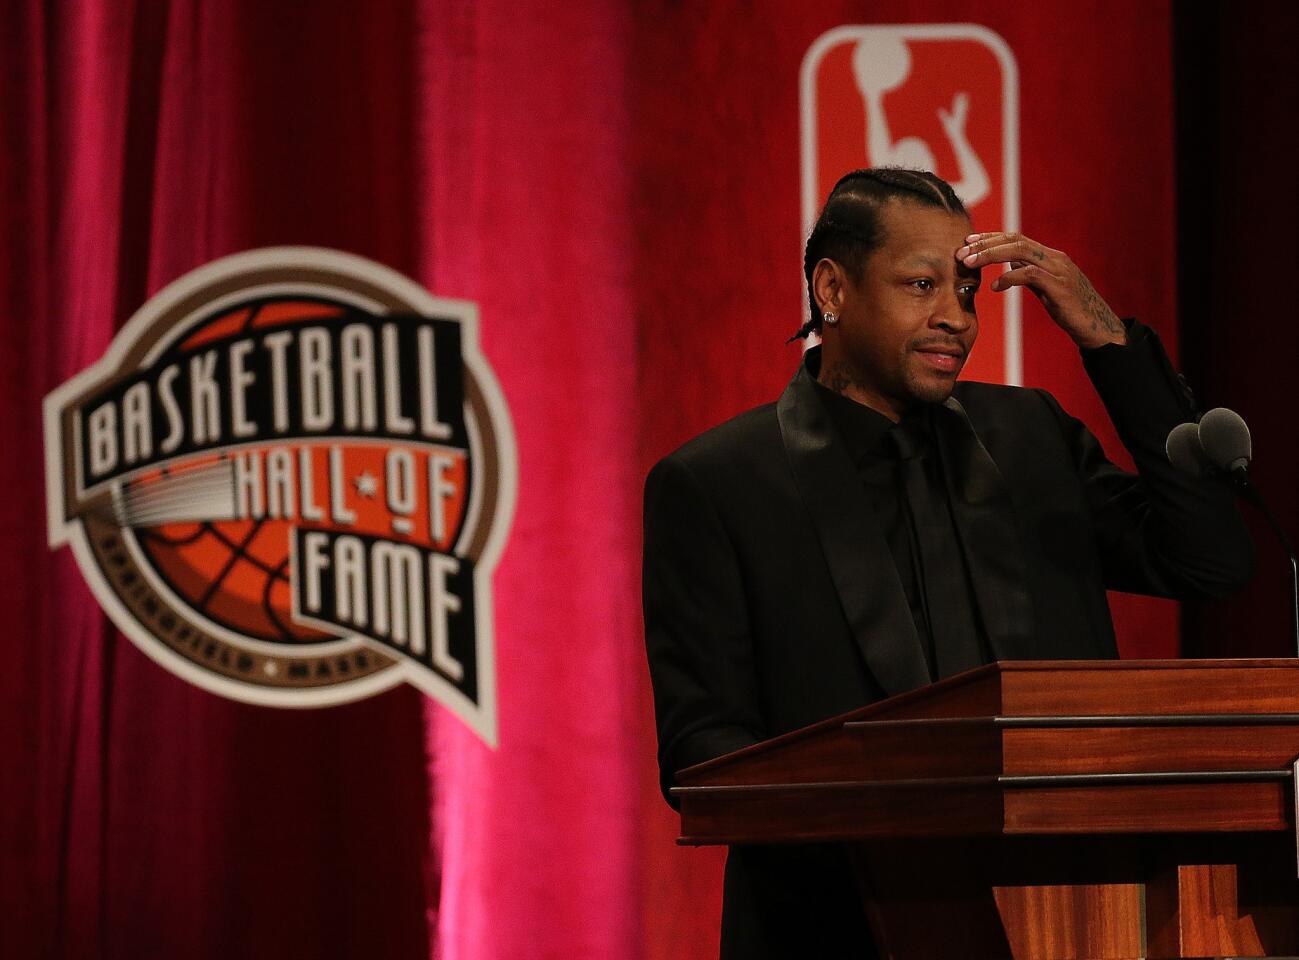 SPRINGFIELD, MA - SEPTEMBER 09: Allen Iverson reacts during the 2016 Basketball Hall of Fame Enshrinement Ceremony at Symphony Hall on September 9, 2016 in Springfield, Massachusetts. (Photo by Jim Rogash/Getty Images) ** OUTS - ELSENT, FPG, CM - OUTS * NM, PH, VA if sourced by CT, LA or MoD **